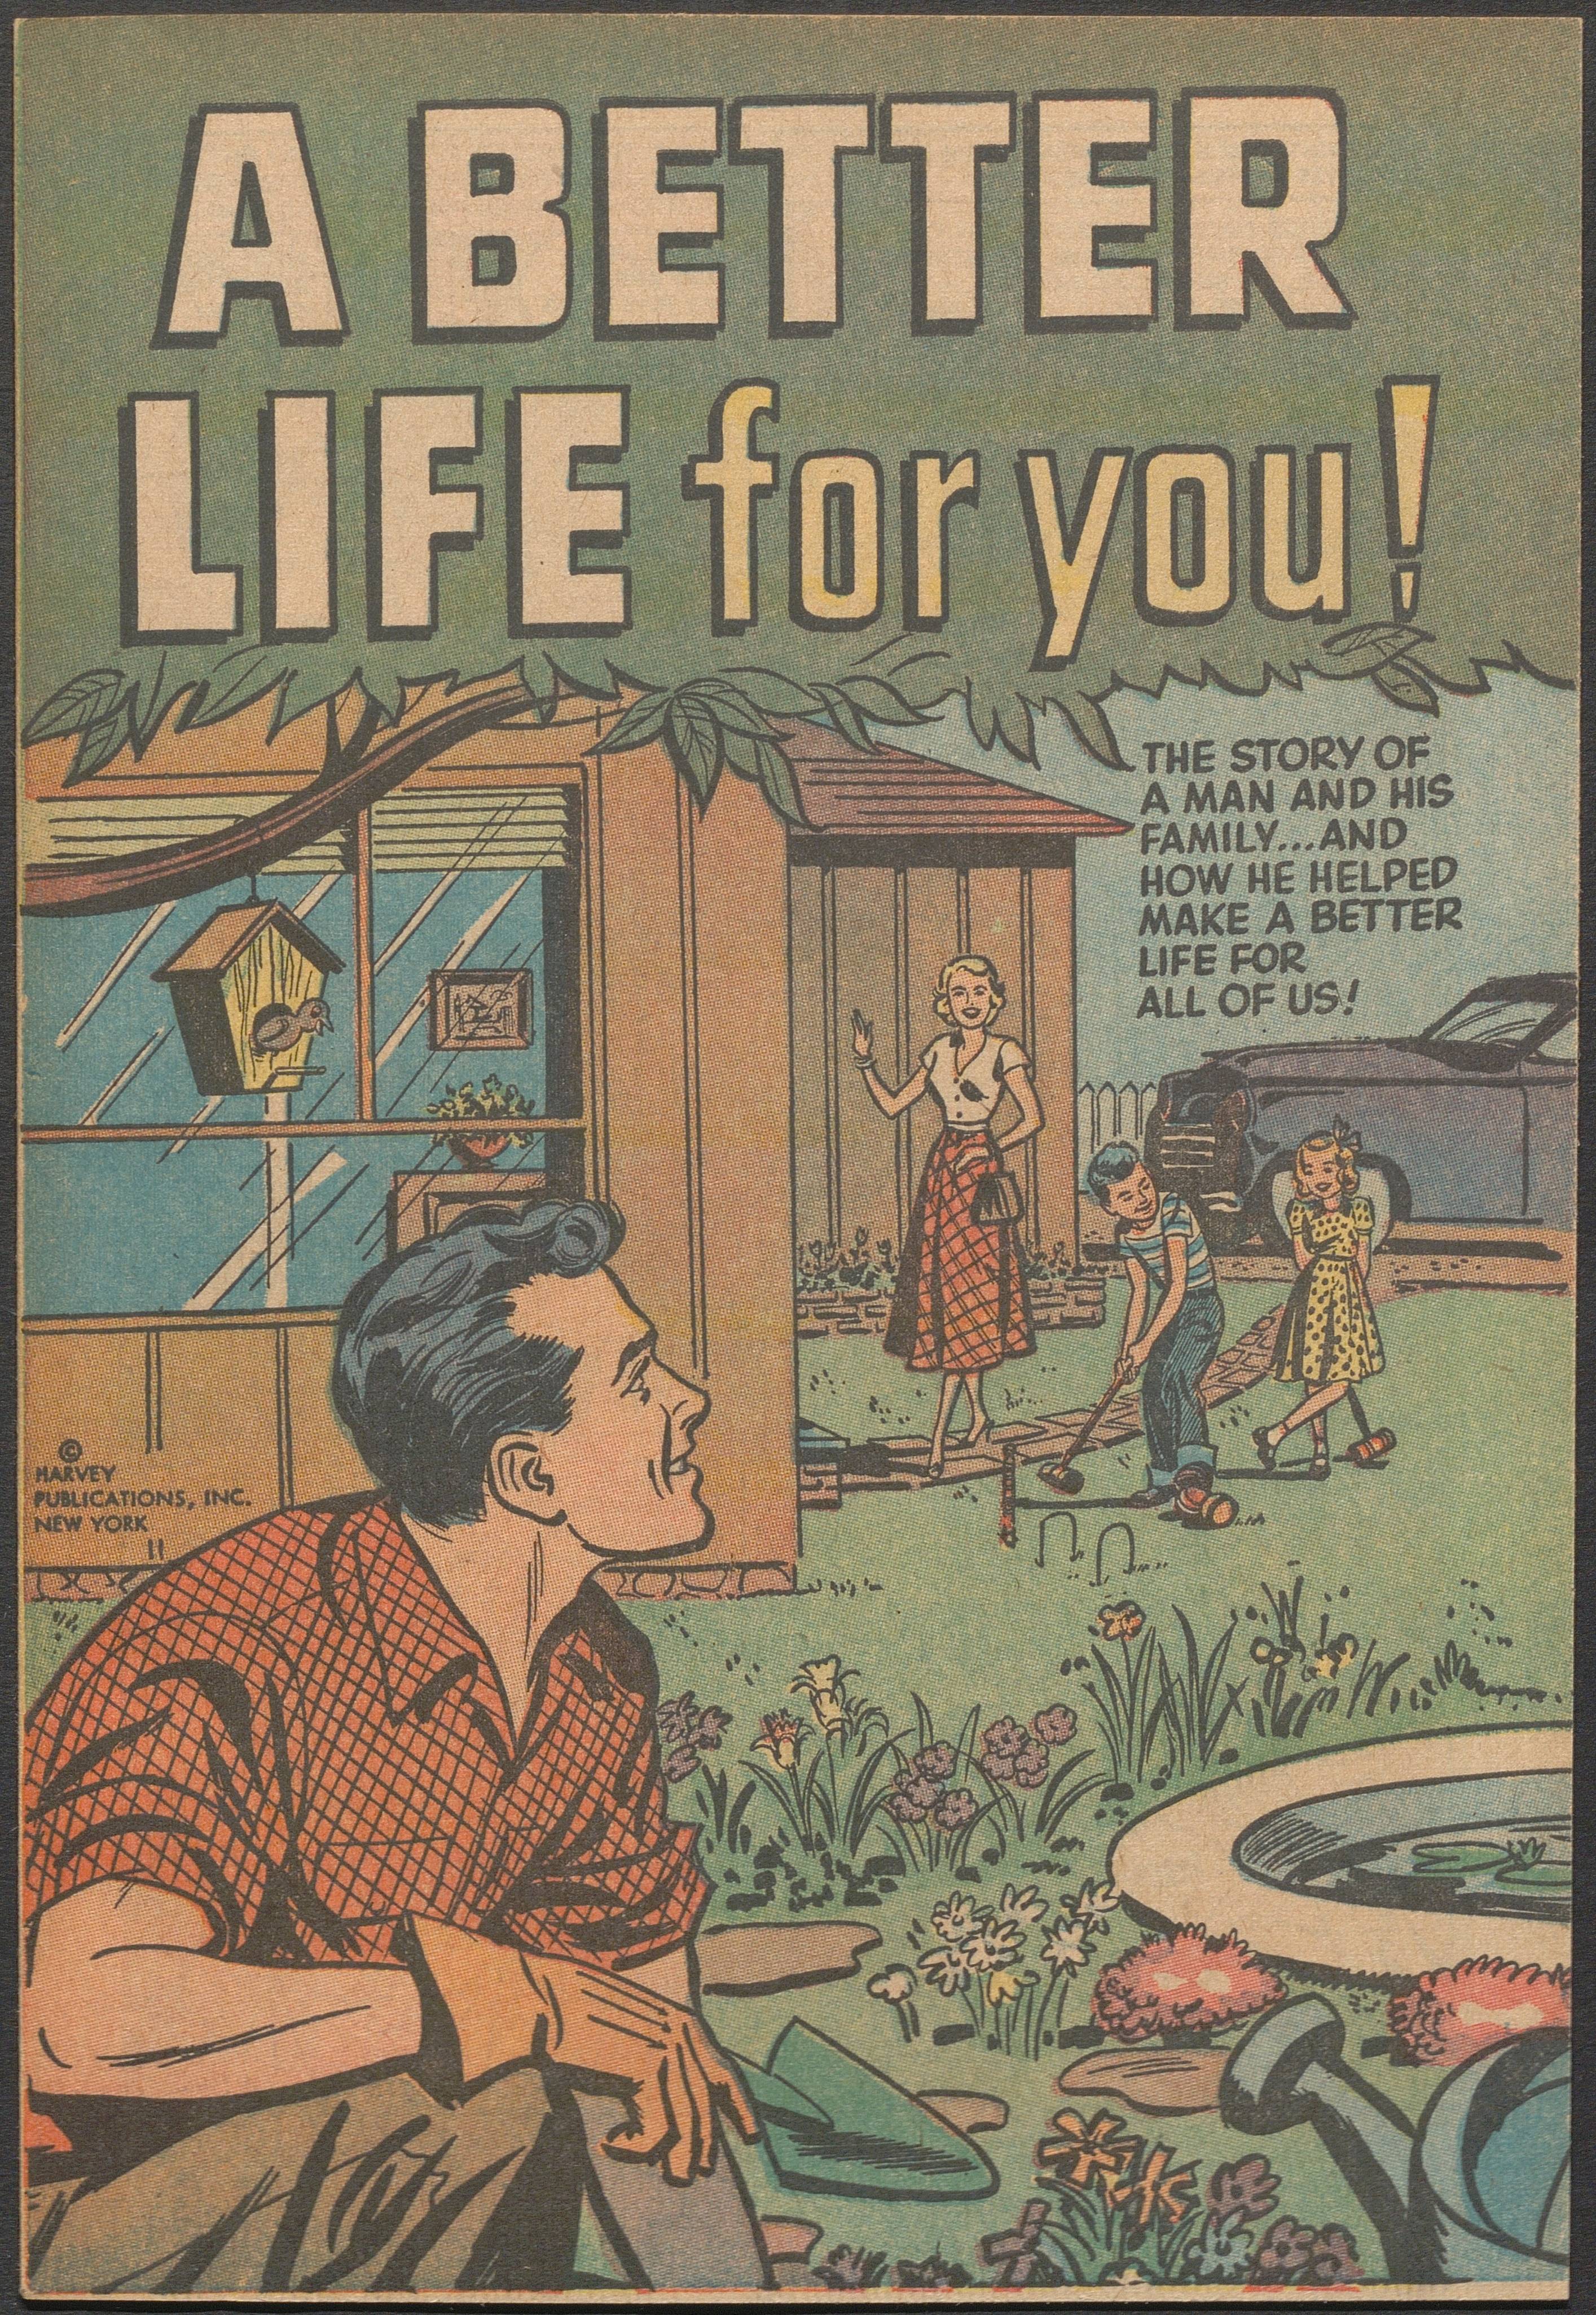 Cover of a comic book titled A better life for you! Illustration shows a suburban family in a yard.